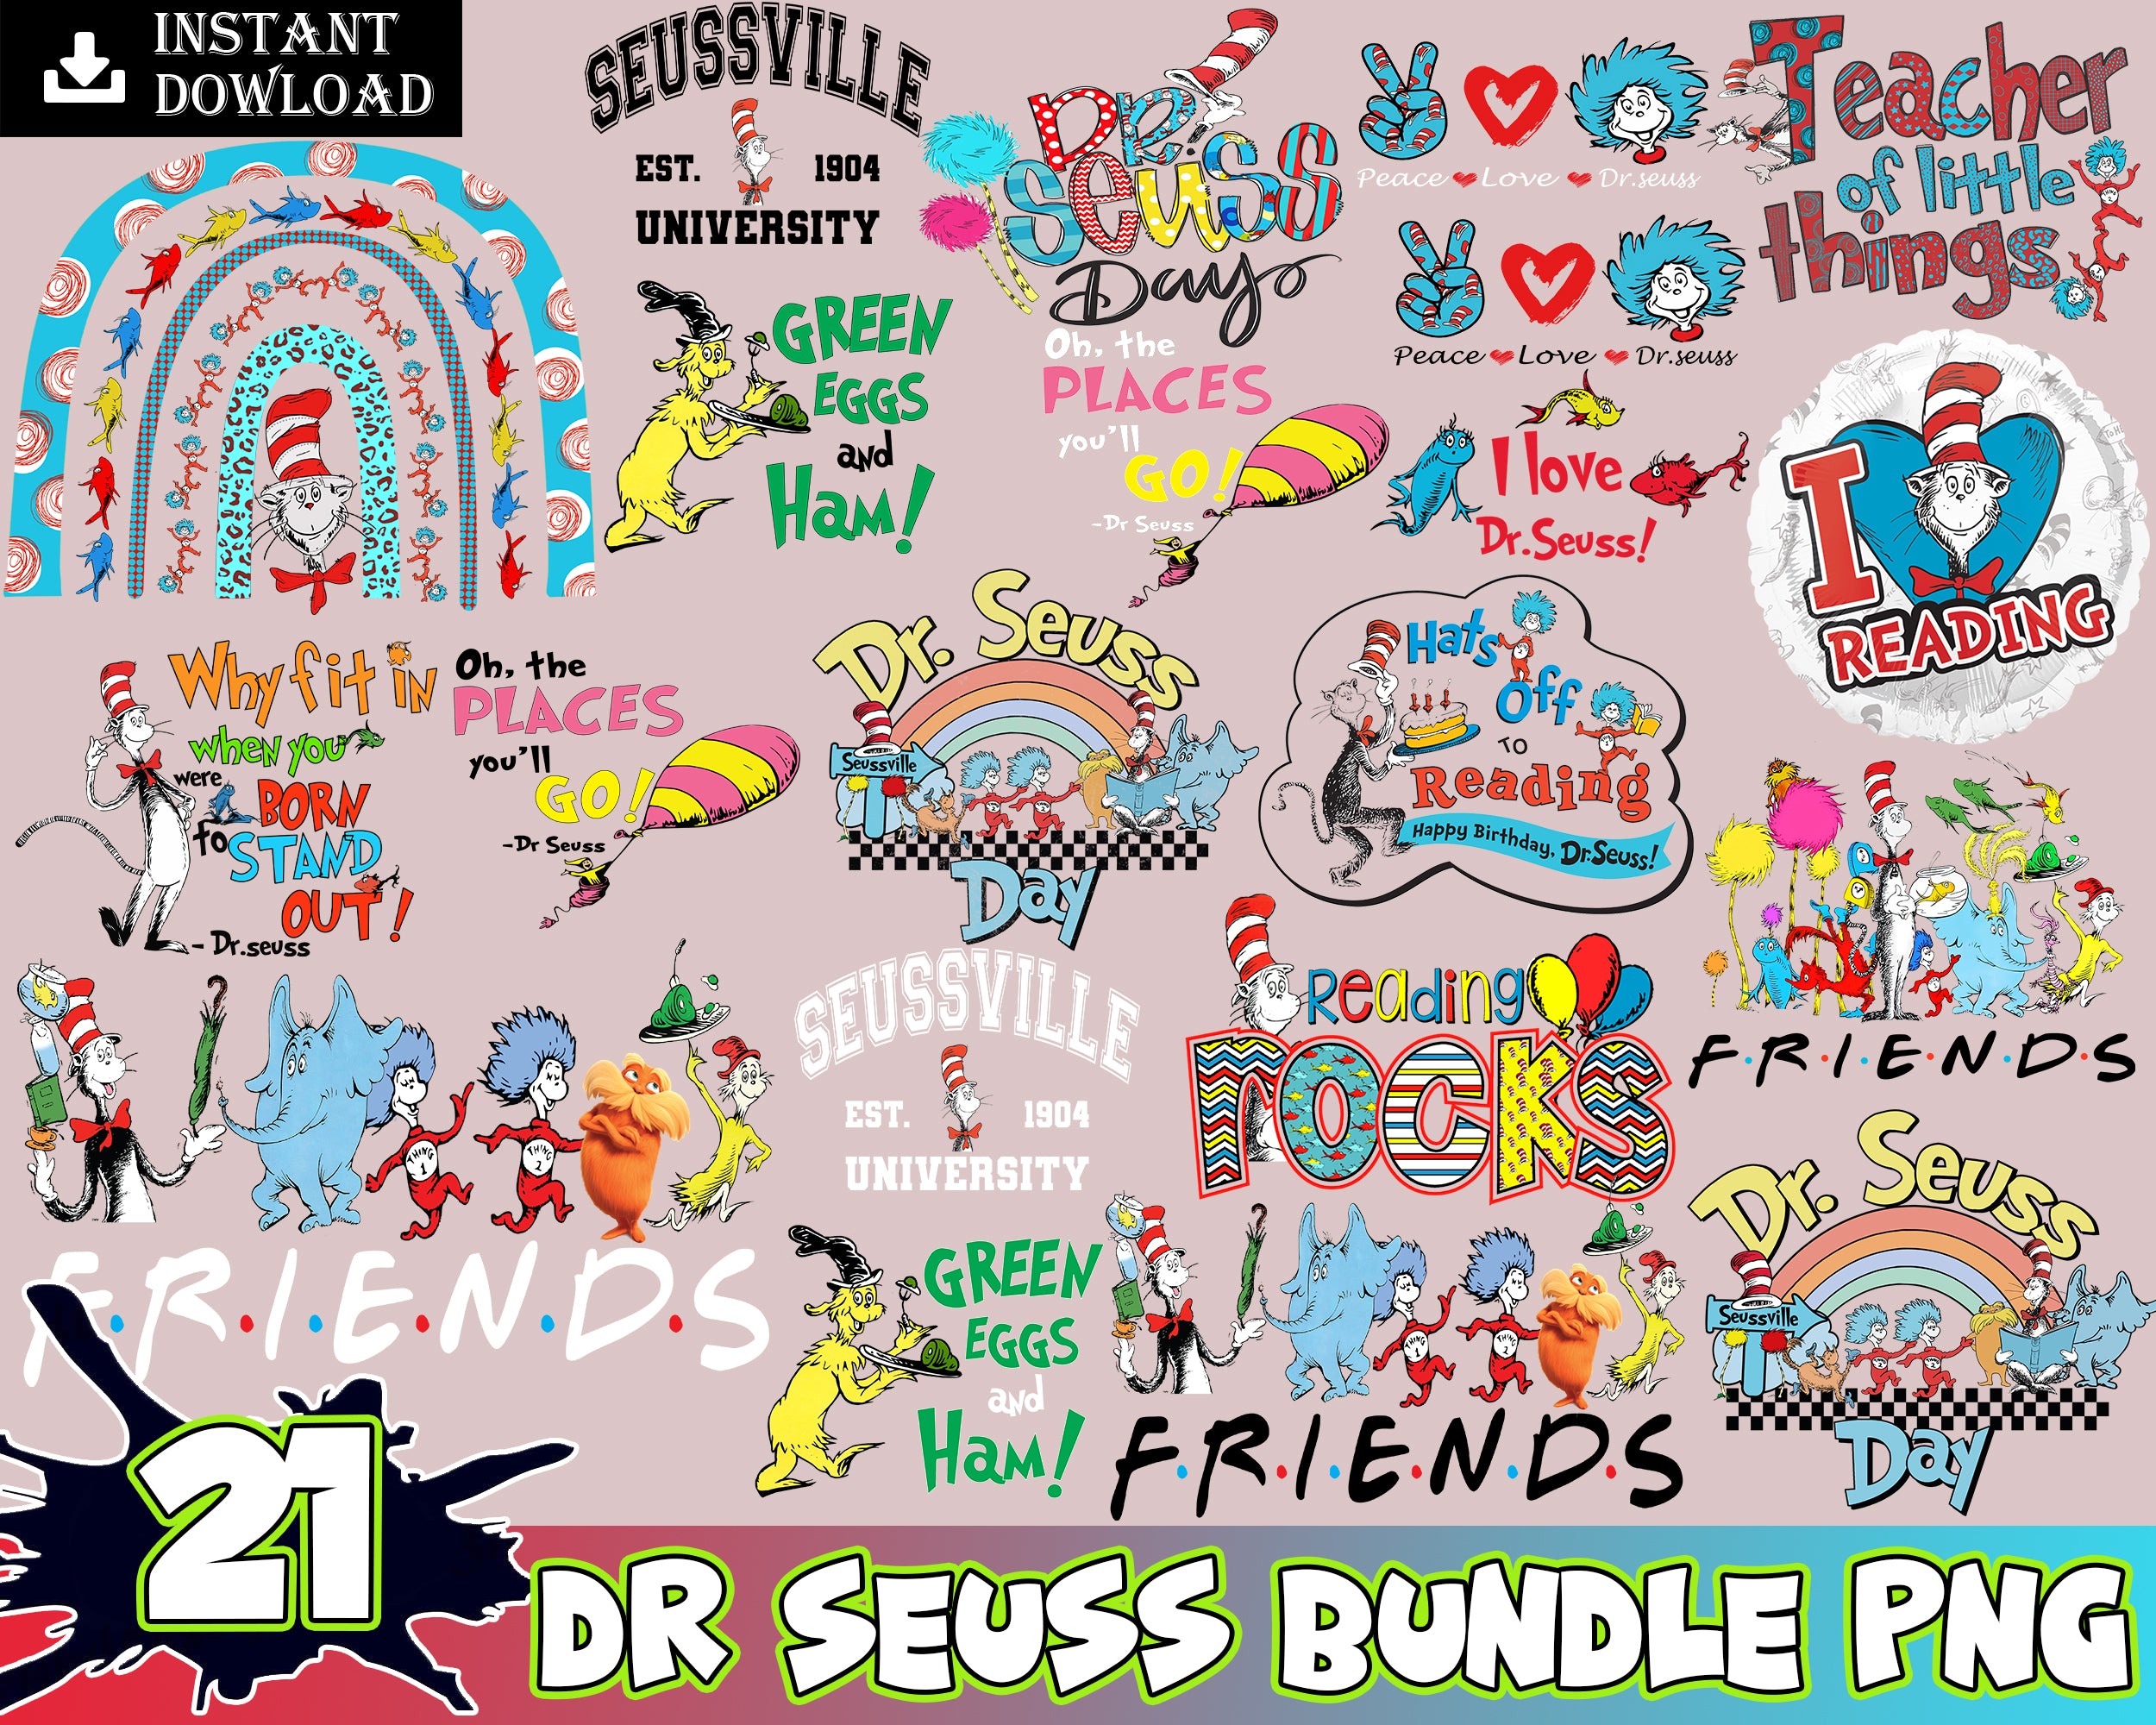 21 Dr. Suesss PNG, Dr. Suess Day, Sublimation Print, Teacher life png, Read across America, Dr. Suess Day Png, Teacher png